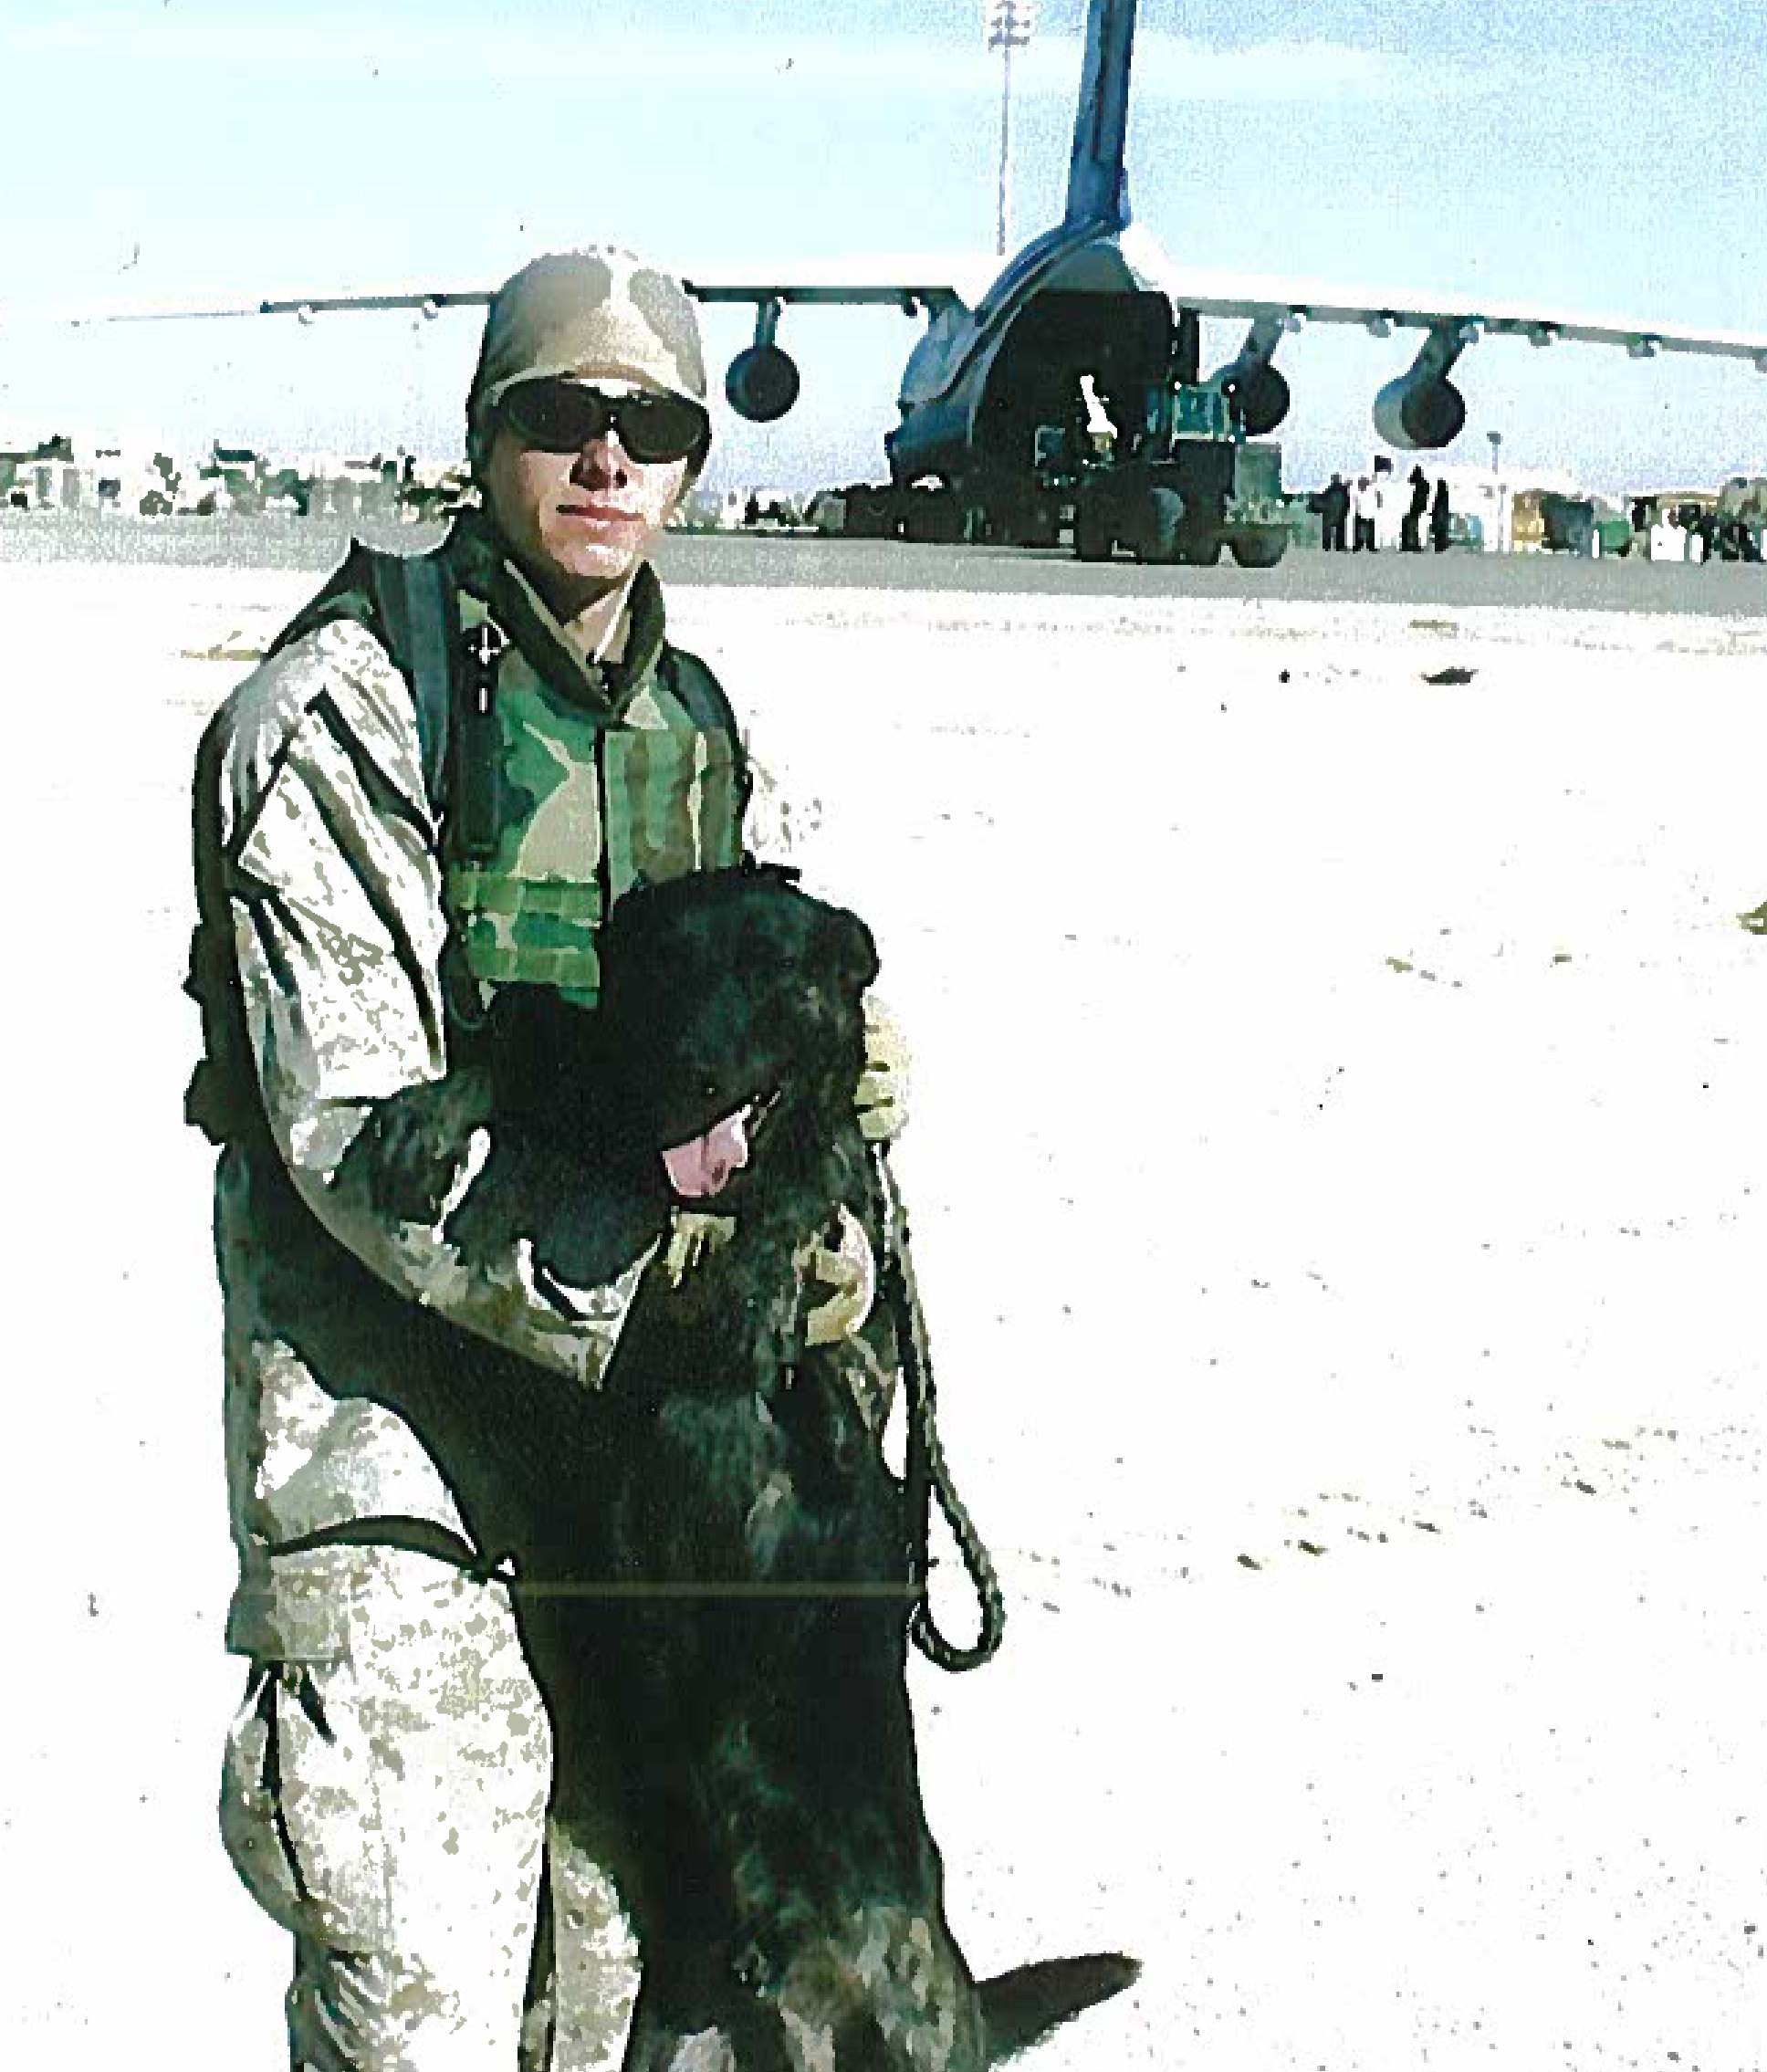 Chris completing his first combat deployment in 2004 with MWD Marco F281. Photo taken at Al Asad Iraq.